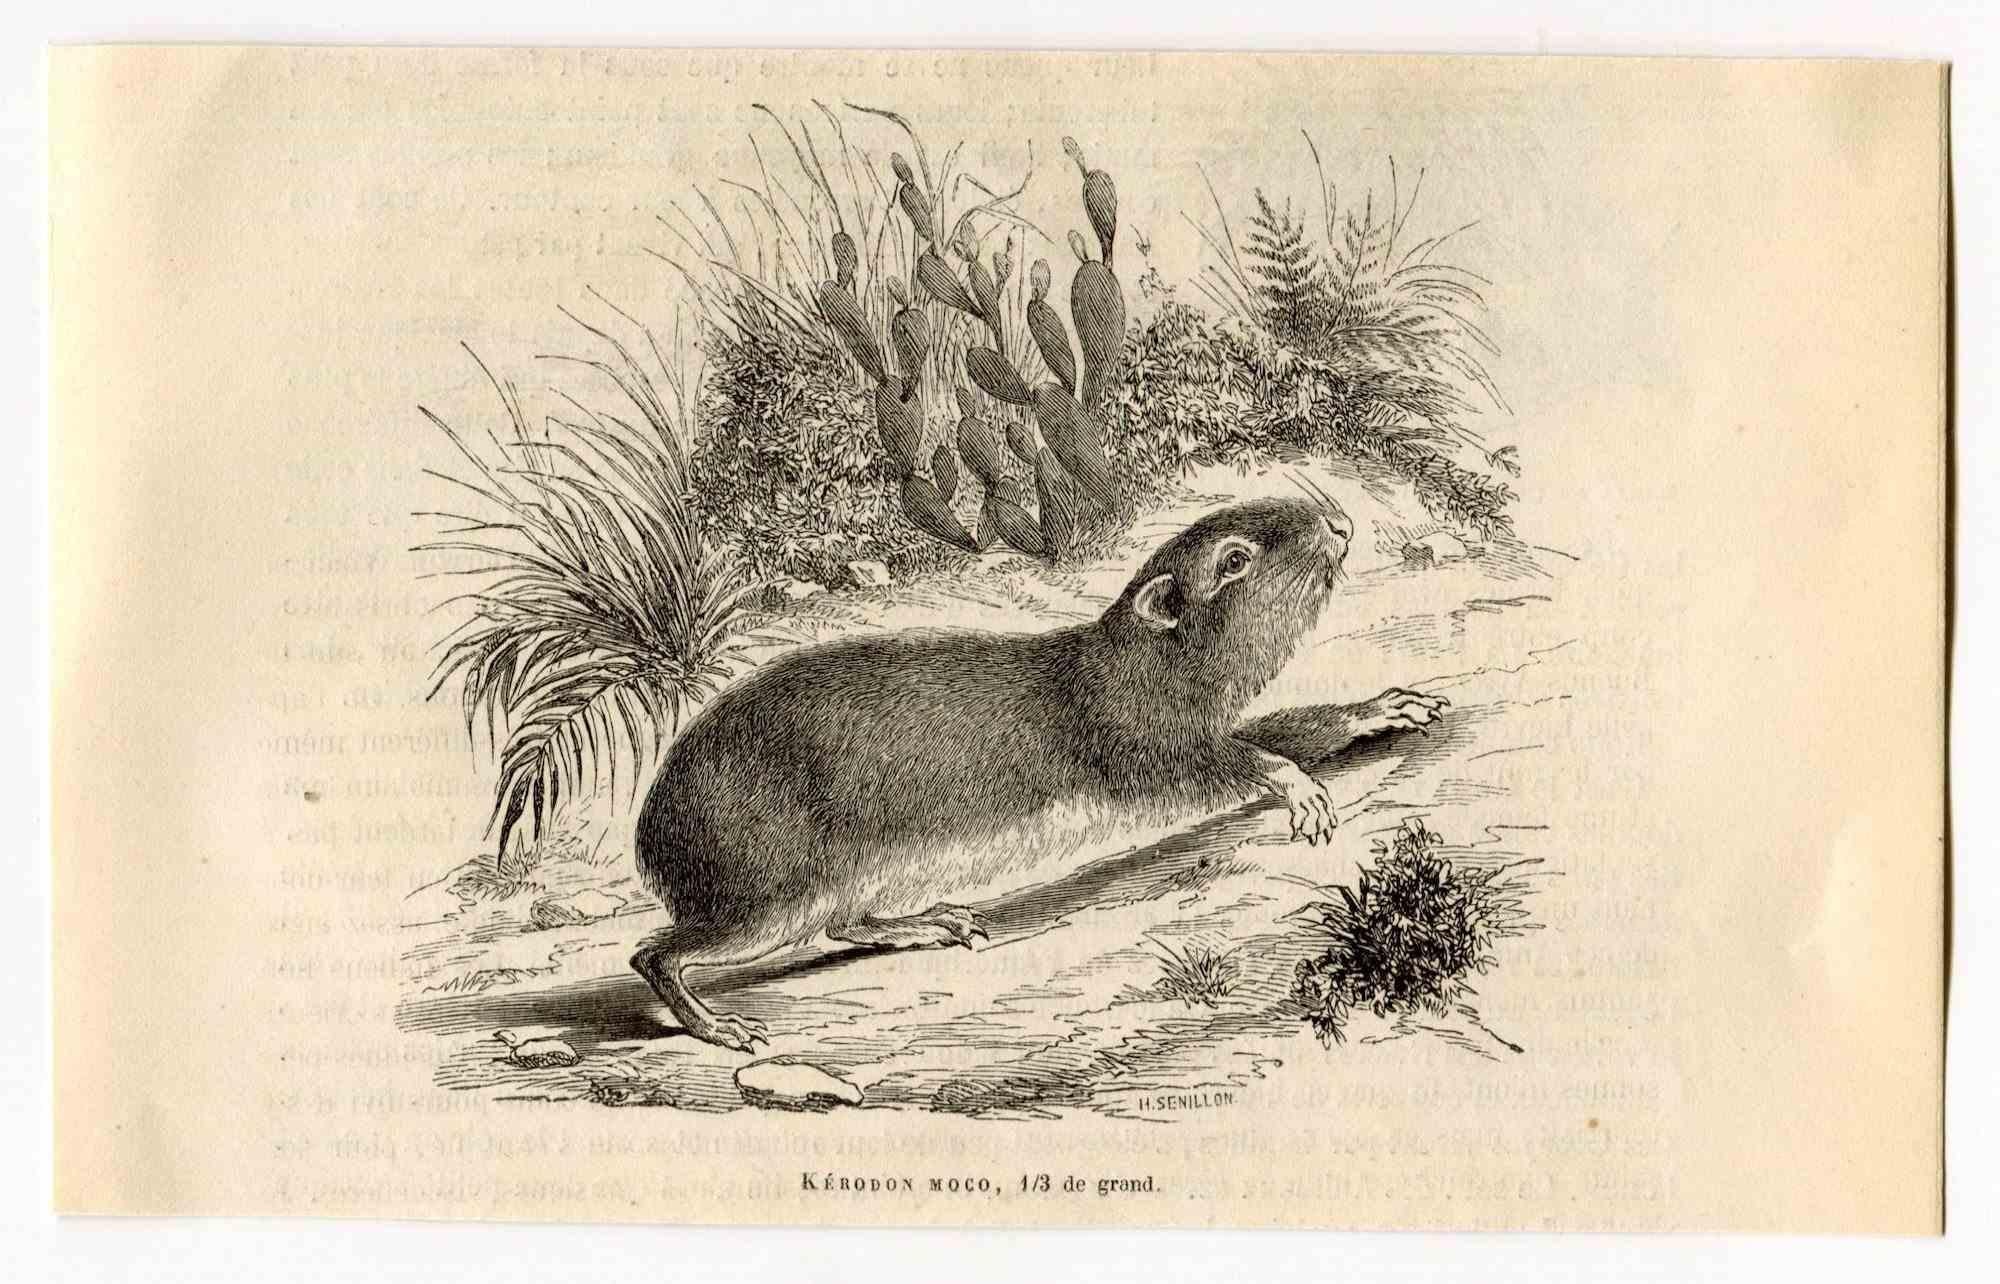 Kerodon is an original lithograph on ivory-colored paper, realized by Paul Gervais (1816-1879). The artwork is from The Series of "Les Trois Règnes de la Nature", and was published in 1854.

Good conditions.

Titled on the lower. With the notes on